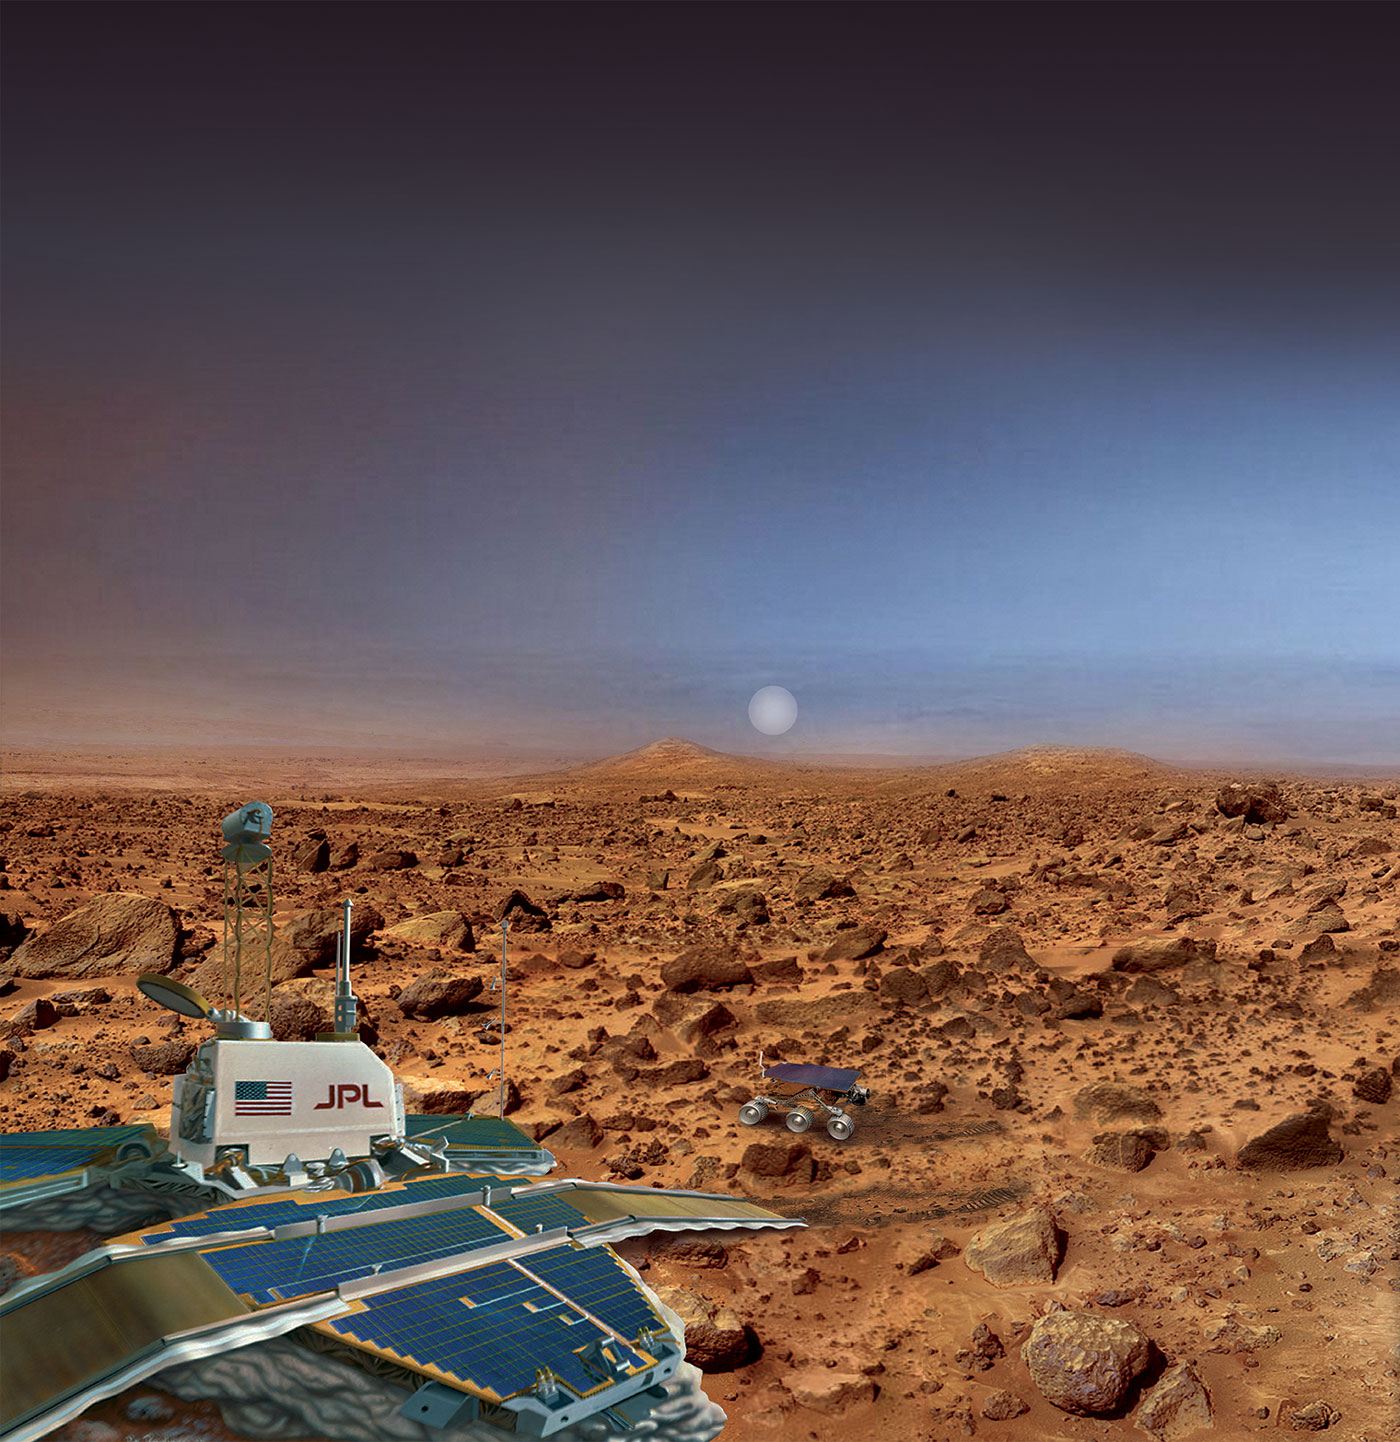 An artist's rendering of Mars Pathfinder, which consisted of a lander and the first-ever robotic rover on the surface of the Red Planet.